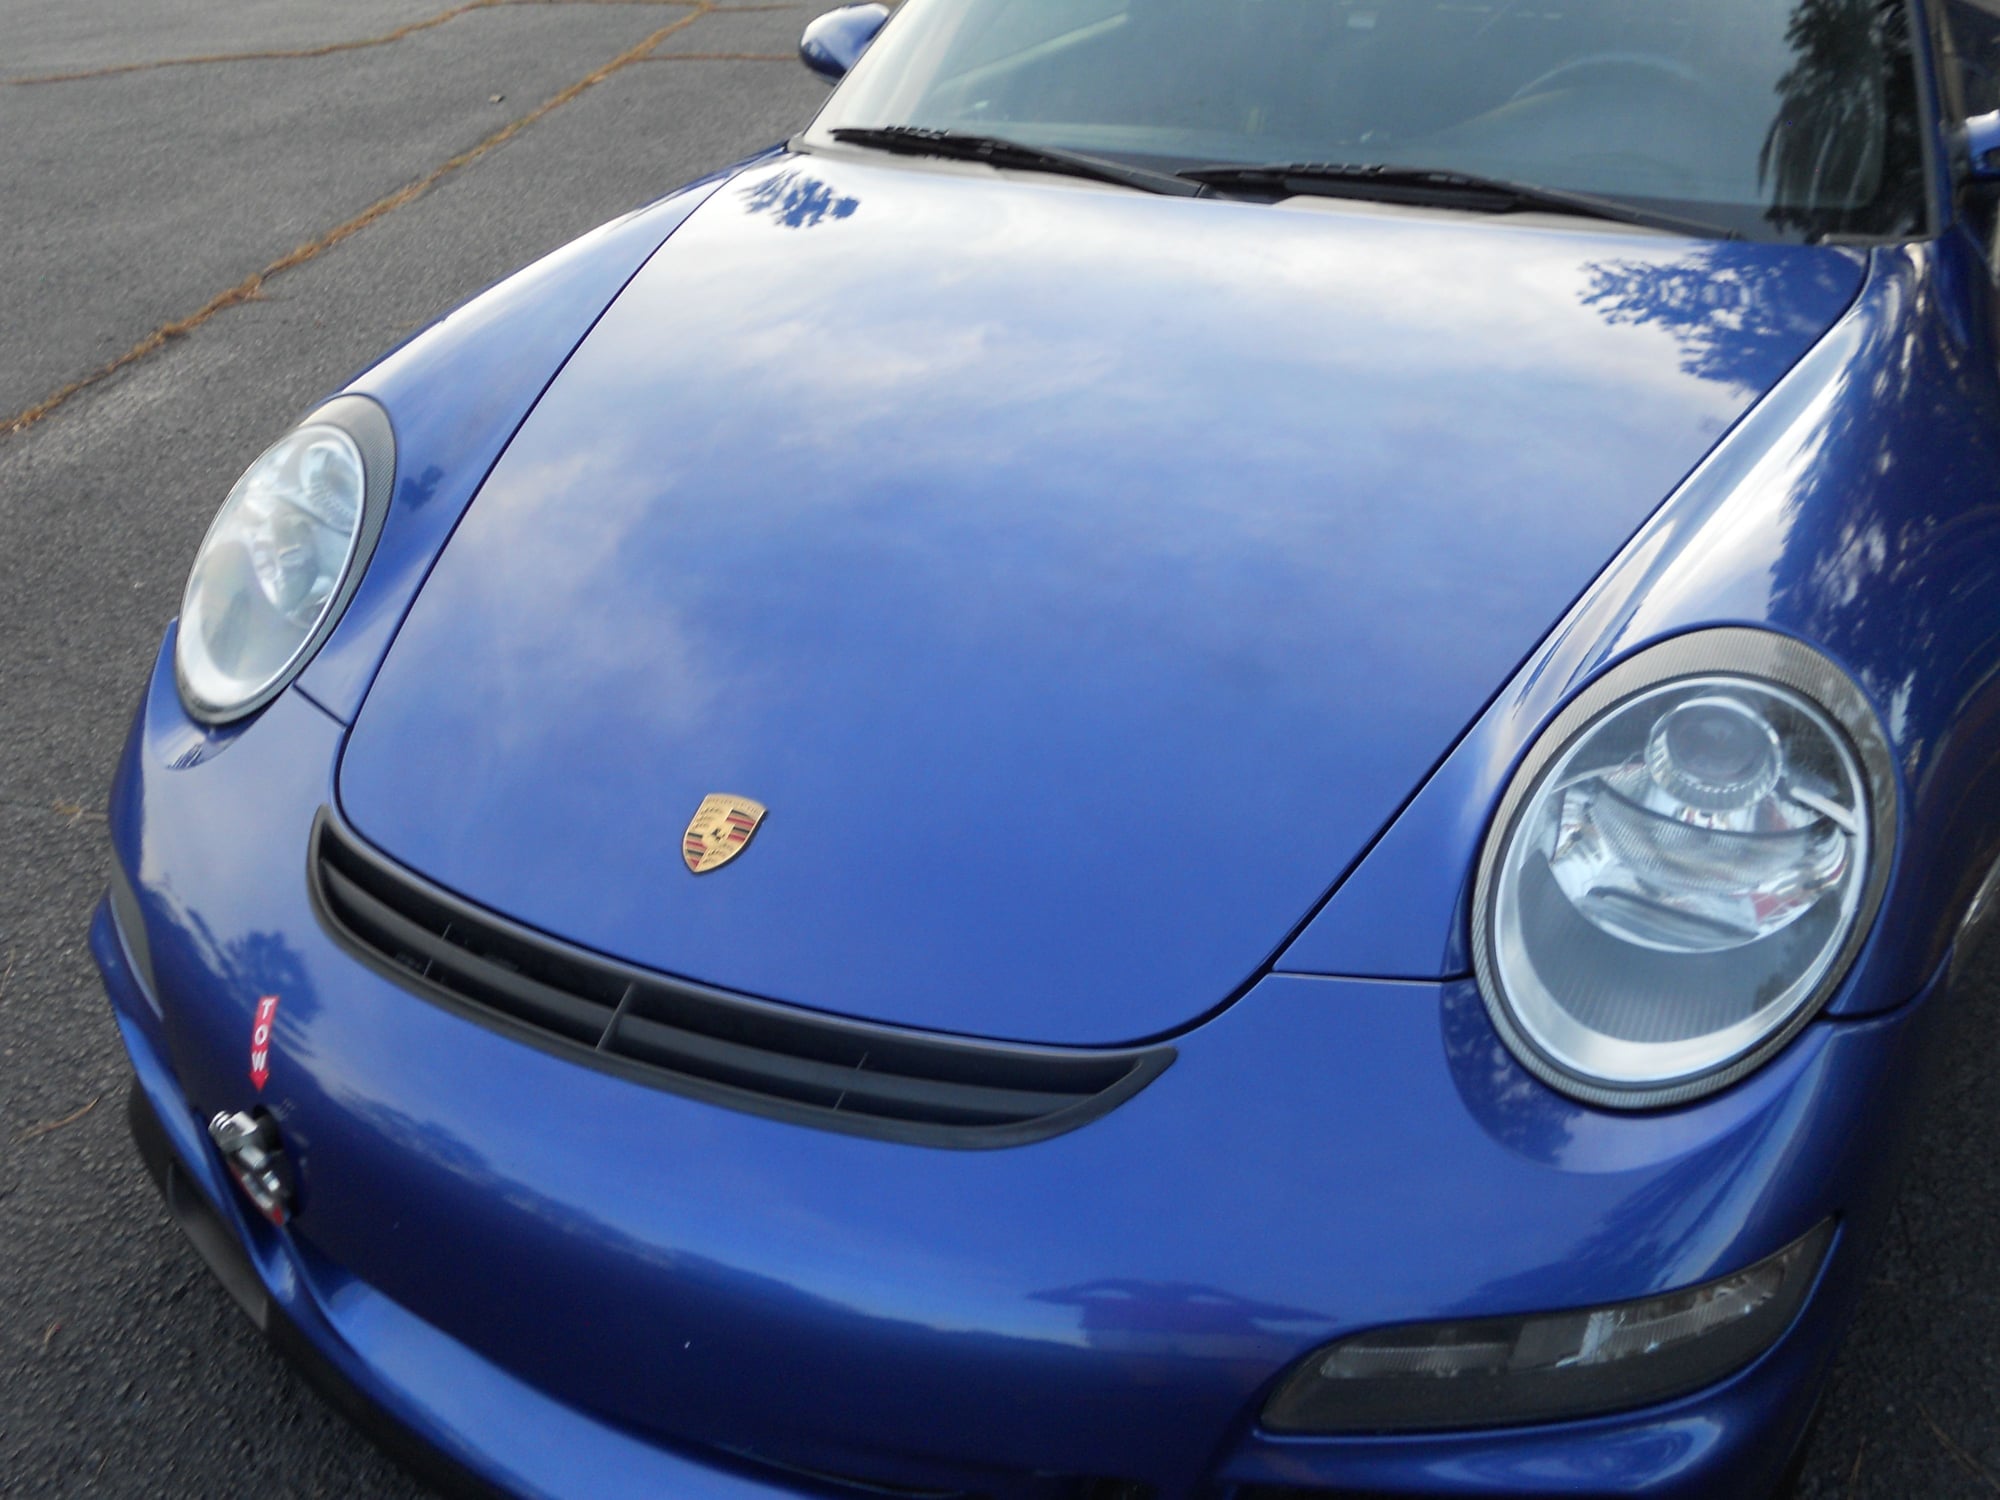 2006 Porsche 911 - Rare cobalt blue 06 C2s w factory X51 kit  price drop 45K - Used - VIN WP0AB29956S741267 - 37,000 Miles - 6 cyl - 2WD - Manual - Coupe - Blue - Augusta, GA 30909, United States